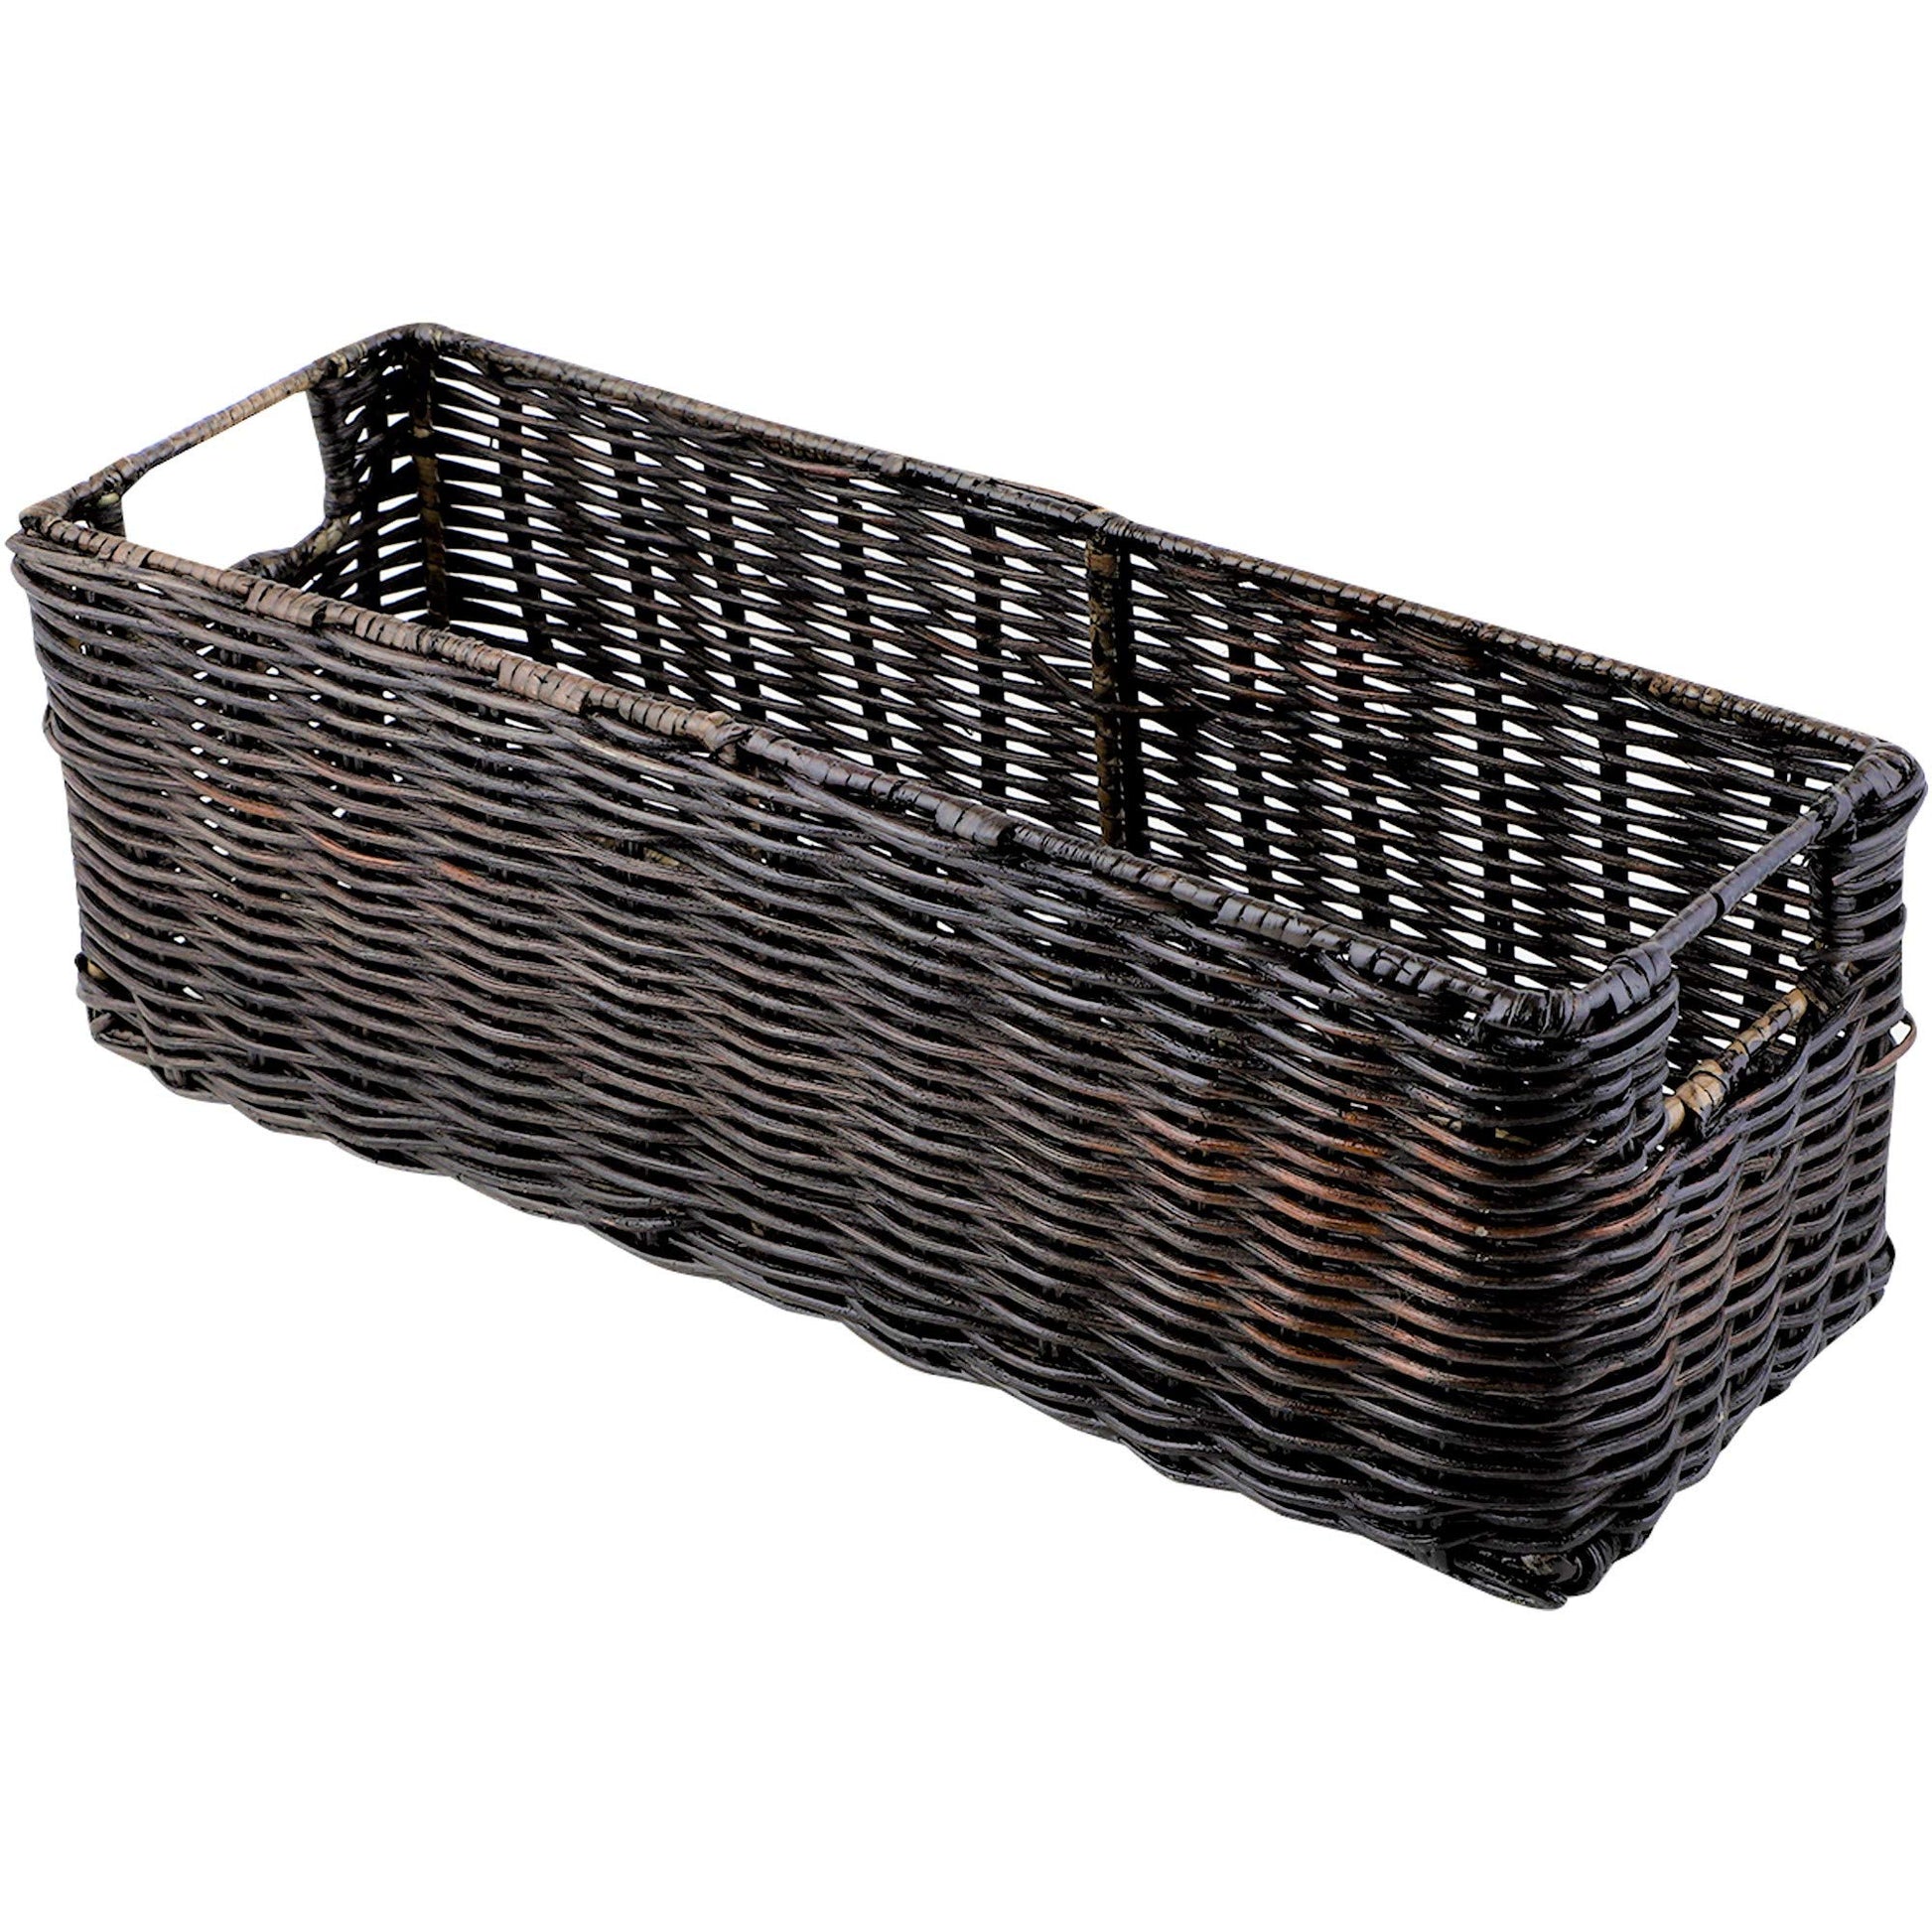 AKWAY Wicker Bathroom Vanity Tray for Toilet Paper and Soap, Kitchen Counter Top Storage Shelf Coffee Table Decorative Tray Cosmetic Organizer Display Holder (14 L x 4.5 W x 4.5 H, Antique Black) - Akway